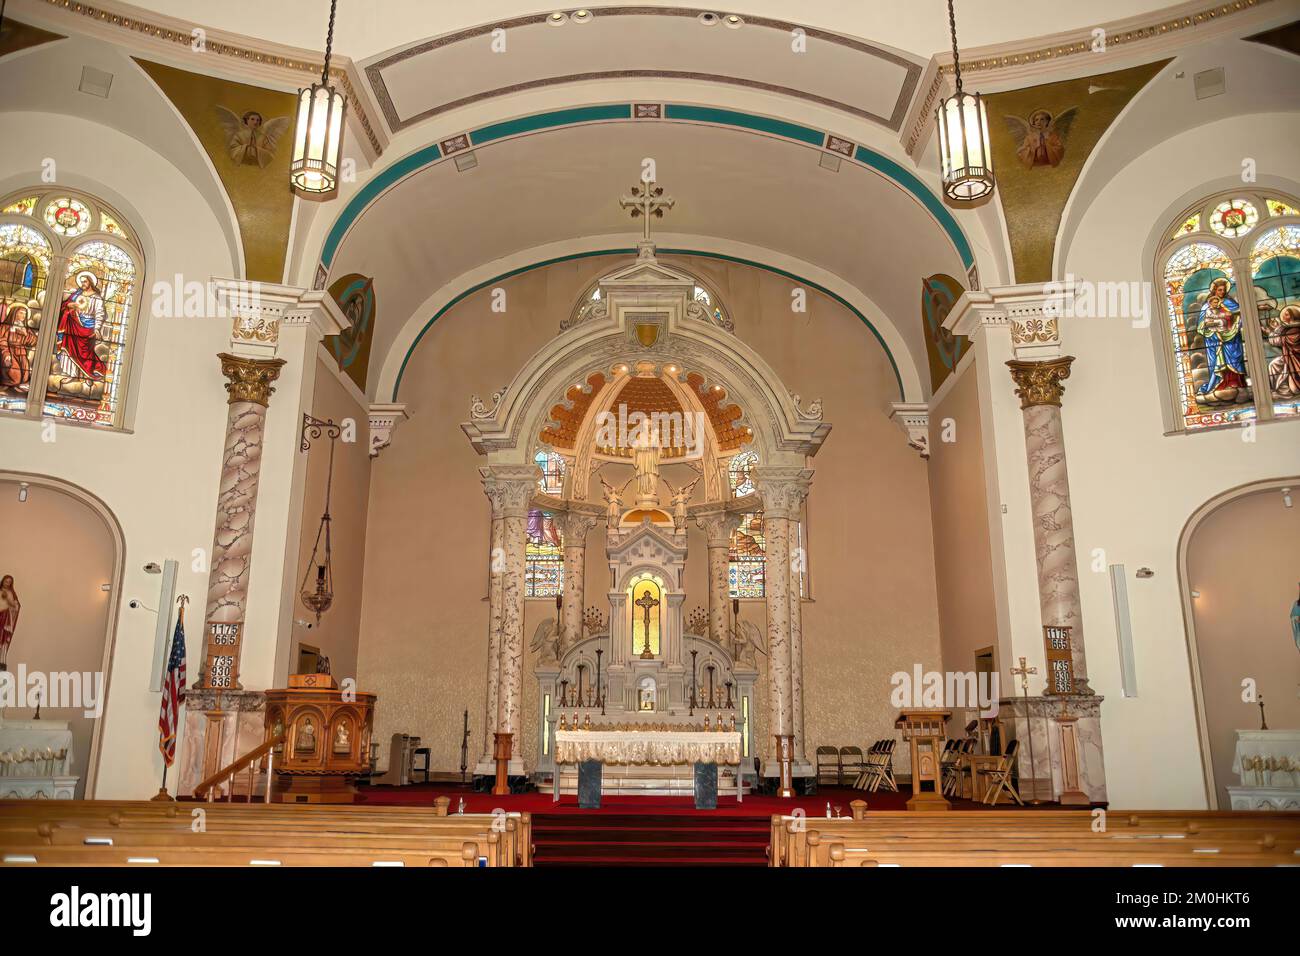 Beautiful sanctuary of the Basilica of St. Stanislaus Catholic Church built in 1894 in the Polish Cathedral Style in Winona, Minnesota USA Stock Photo